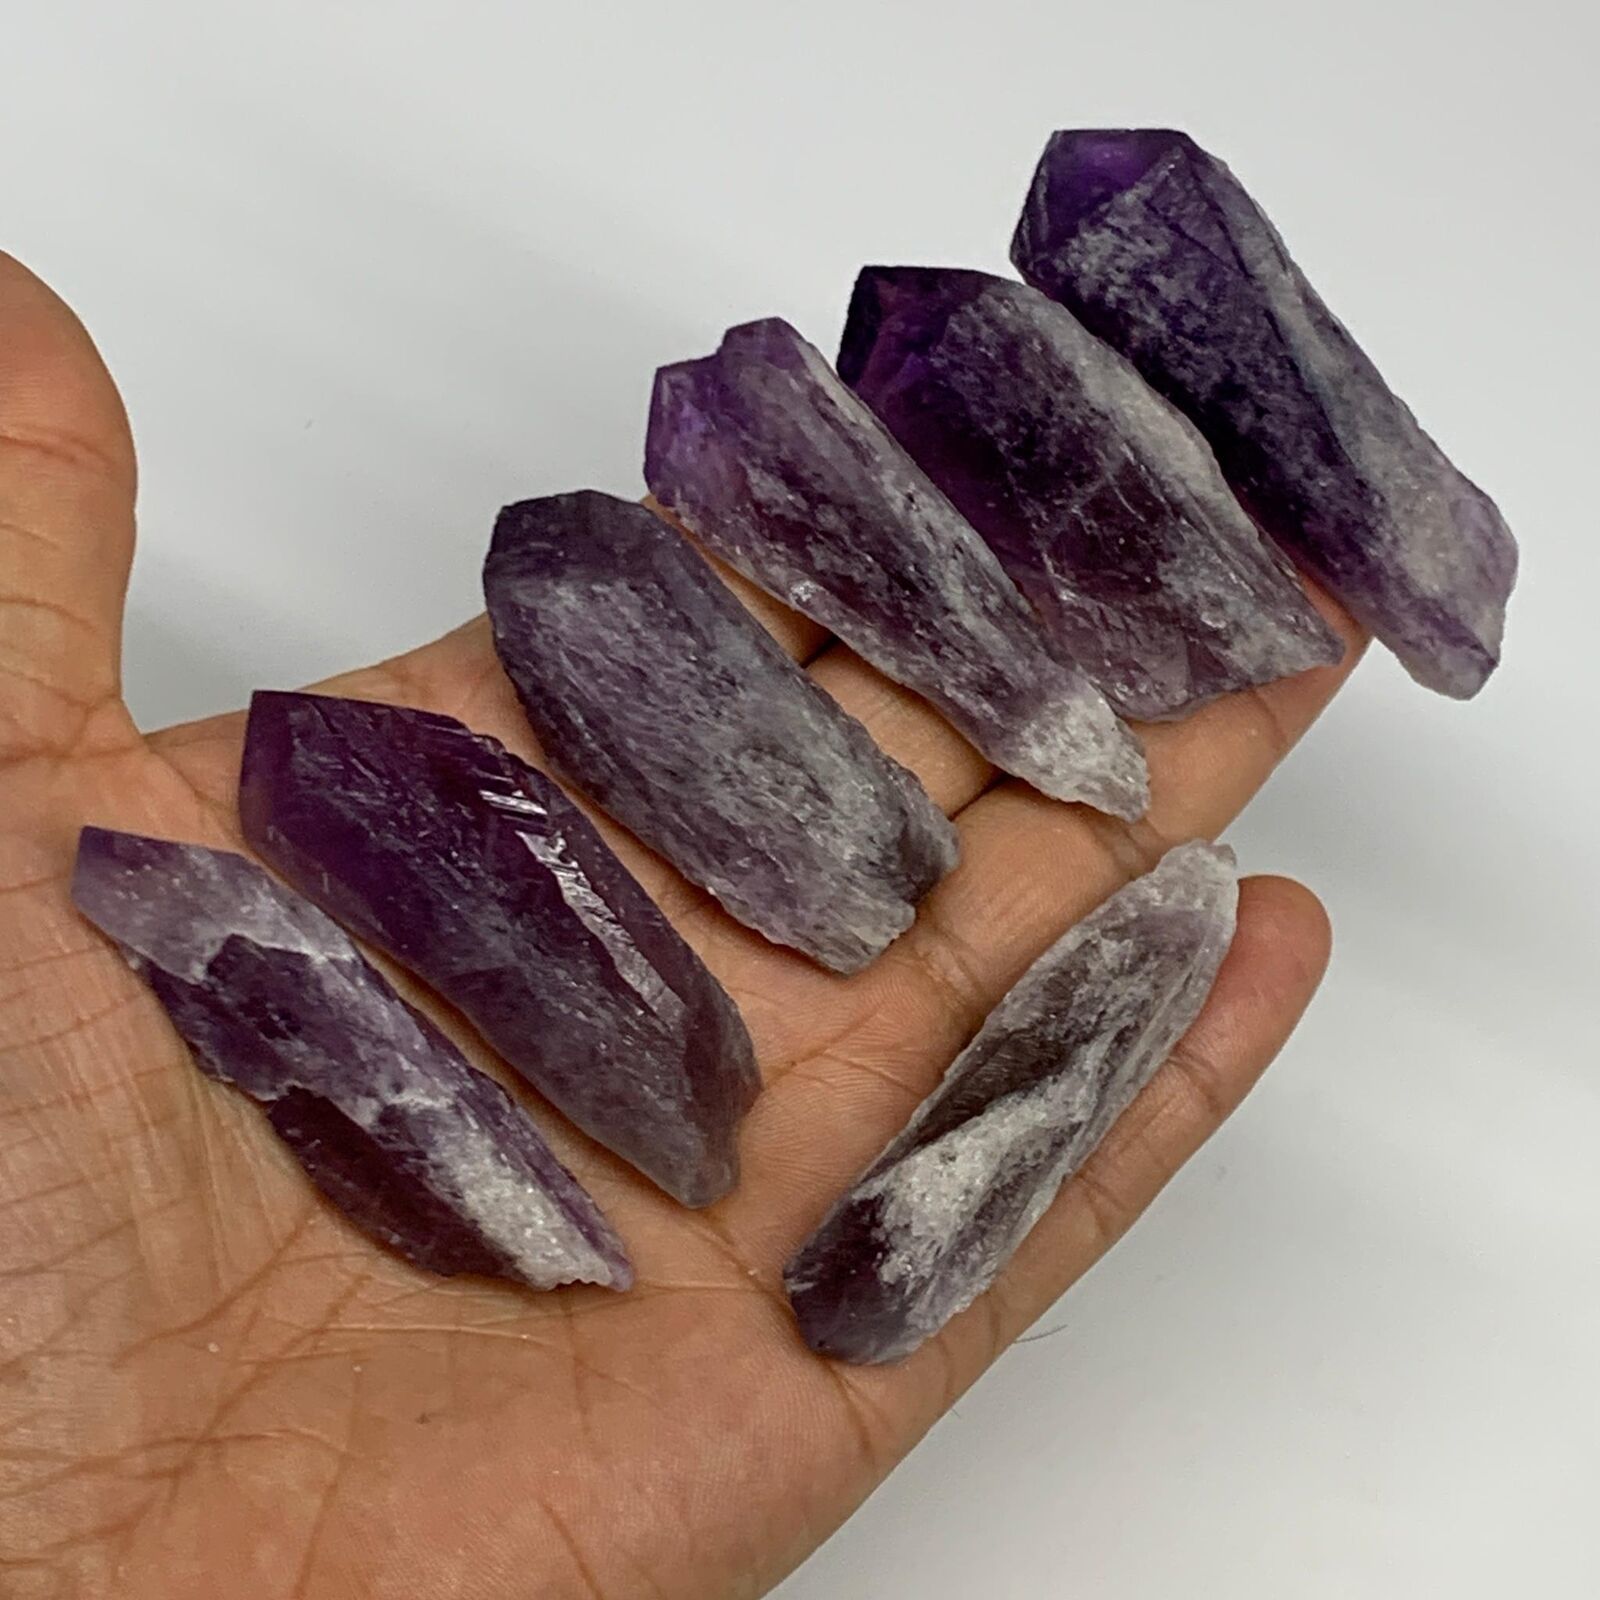 Primary image for 132.9g, 1.9" - 2.5", 7pcs, Amethyst Point Polished Rough lower part @Brazil, B28